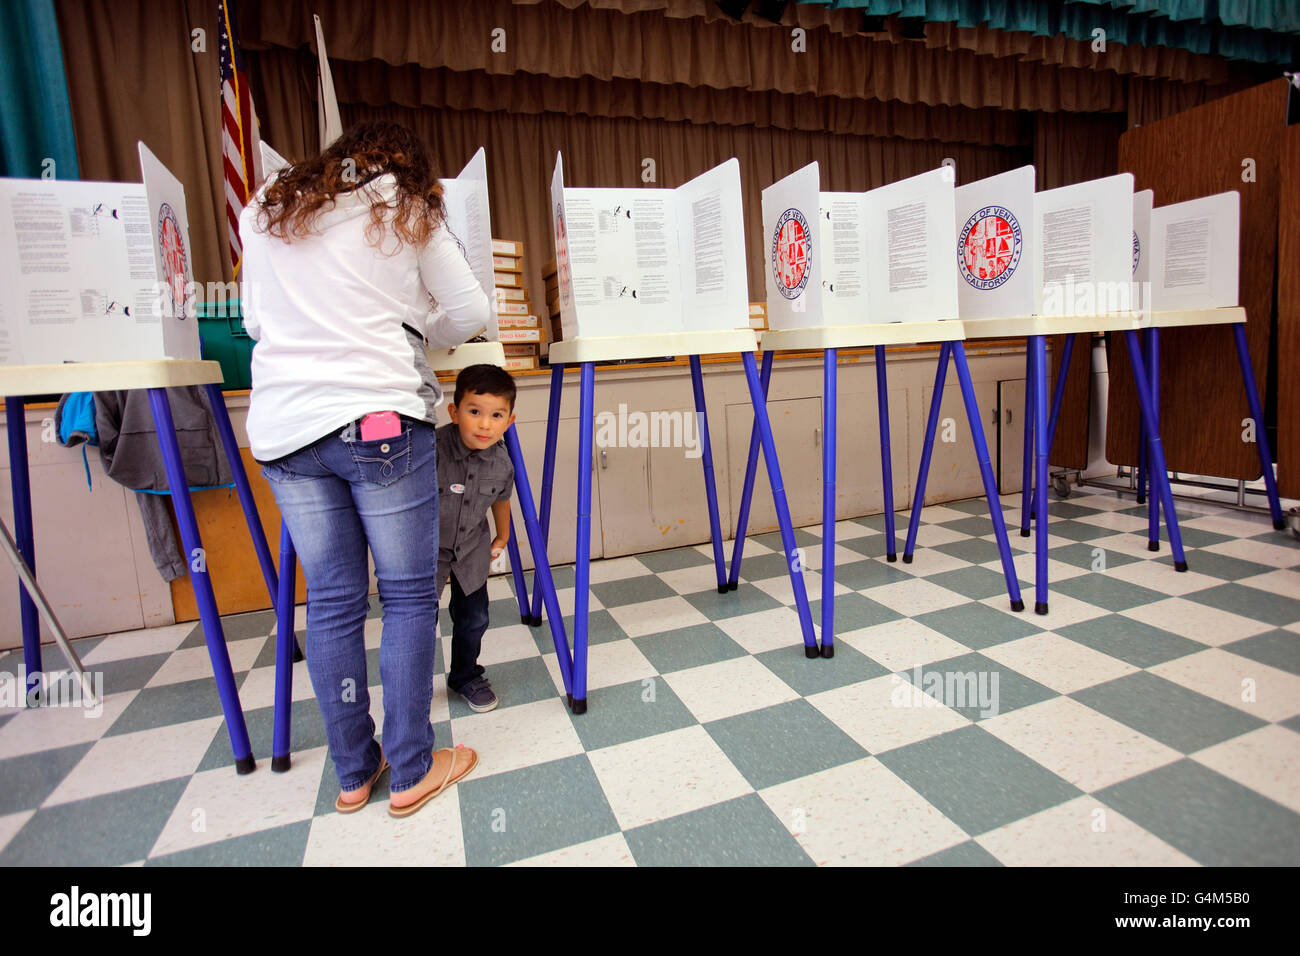 Ventura County, California Citizens Turn Out to Vote Stock Photo